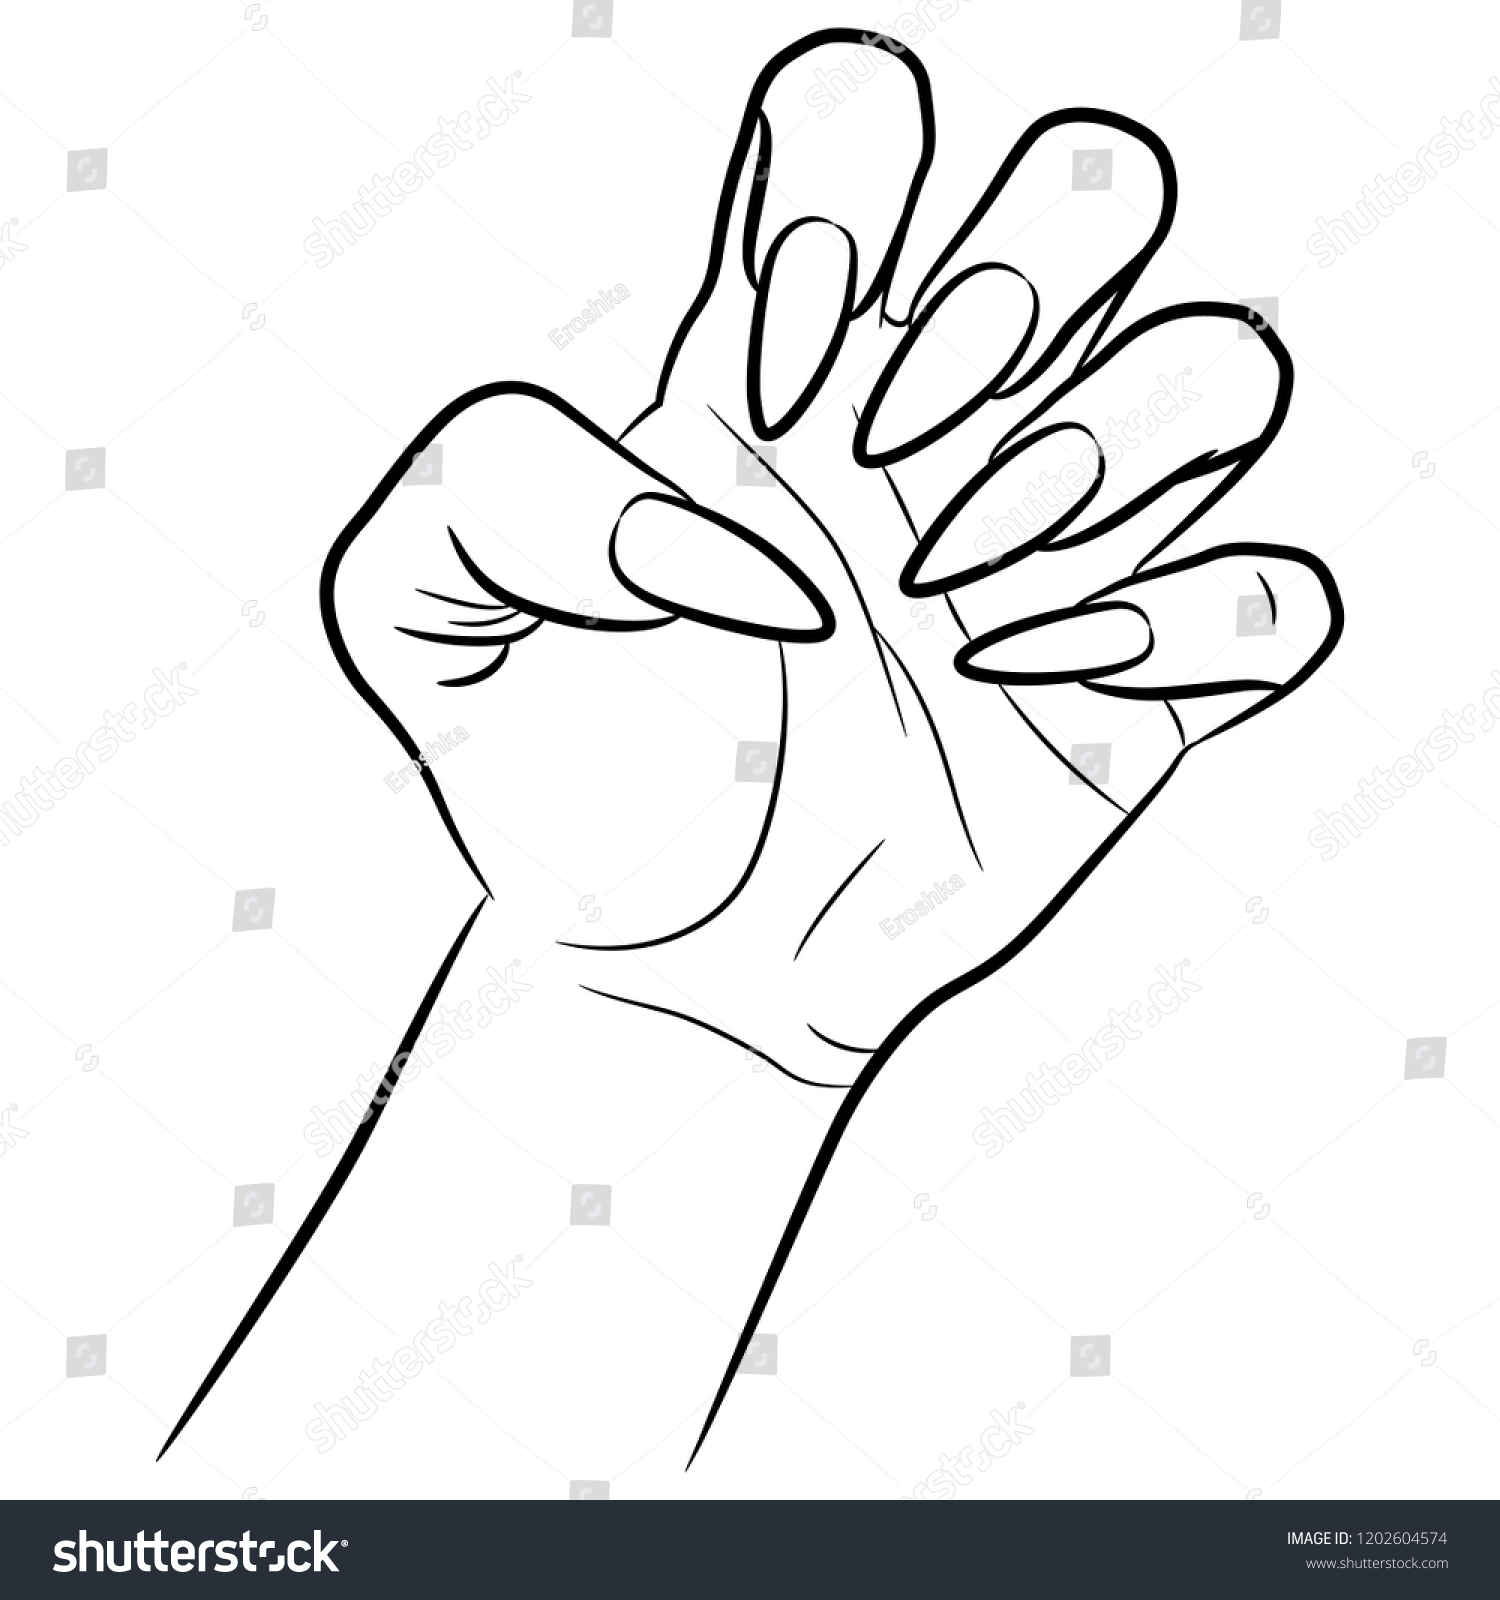 Isolated Vector Illustration Human Hand Clenched Stock Vector Royalty Free